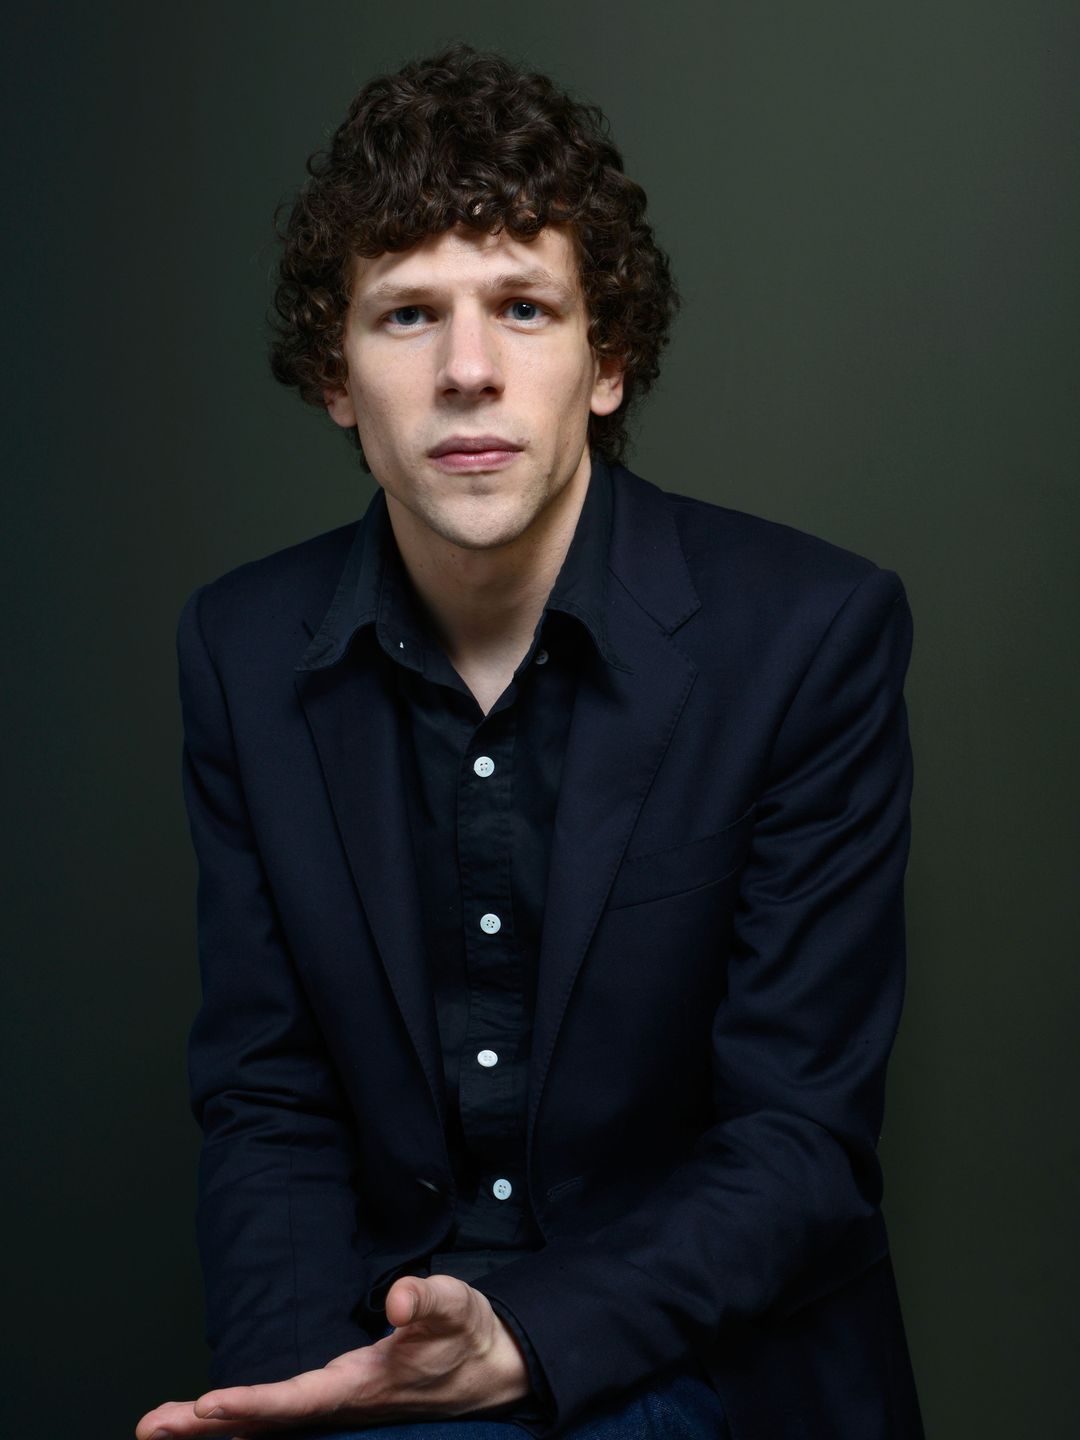 Jesse Eisenberg who are his parents